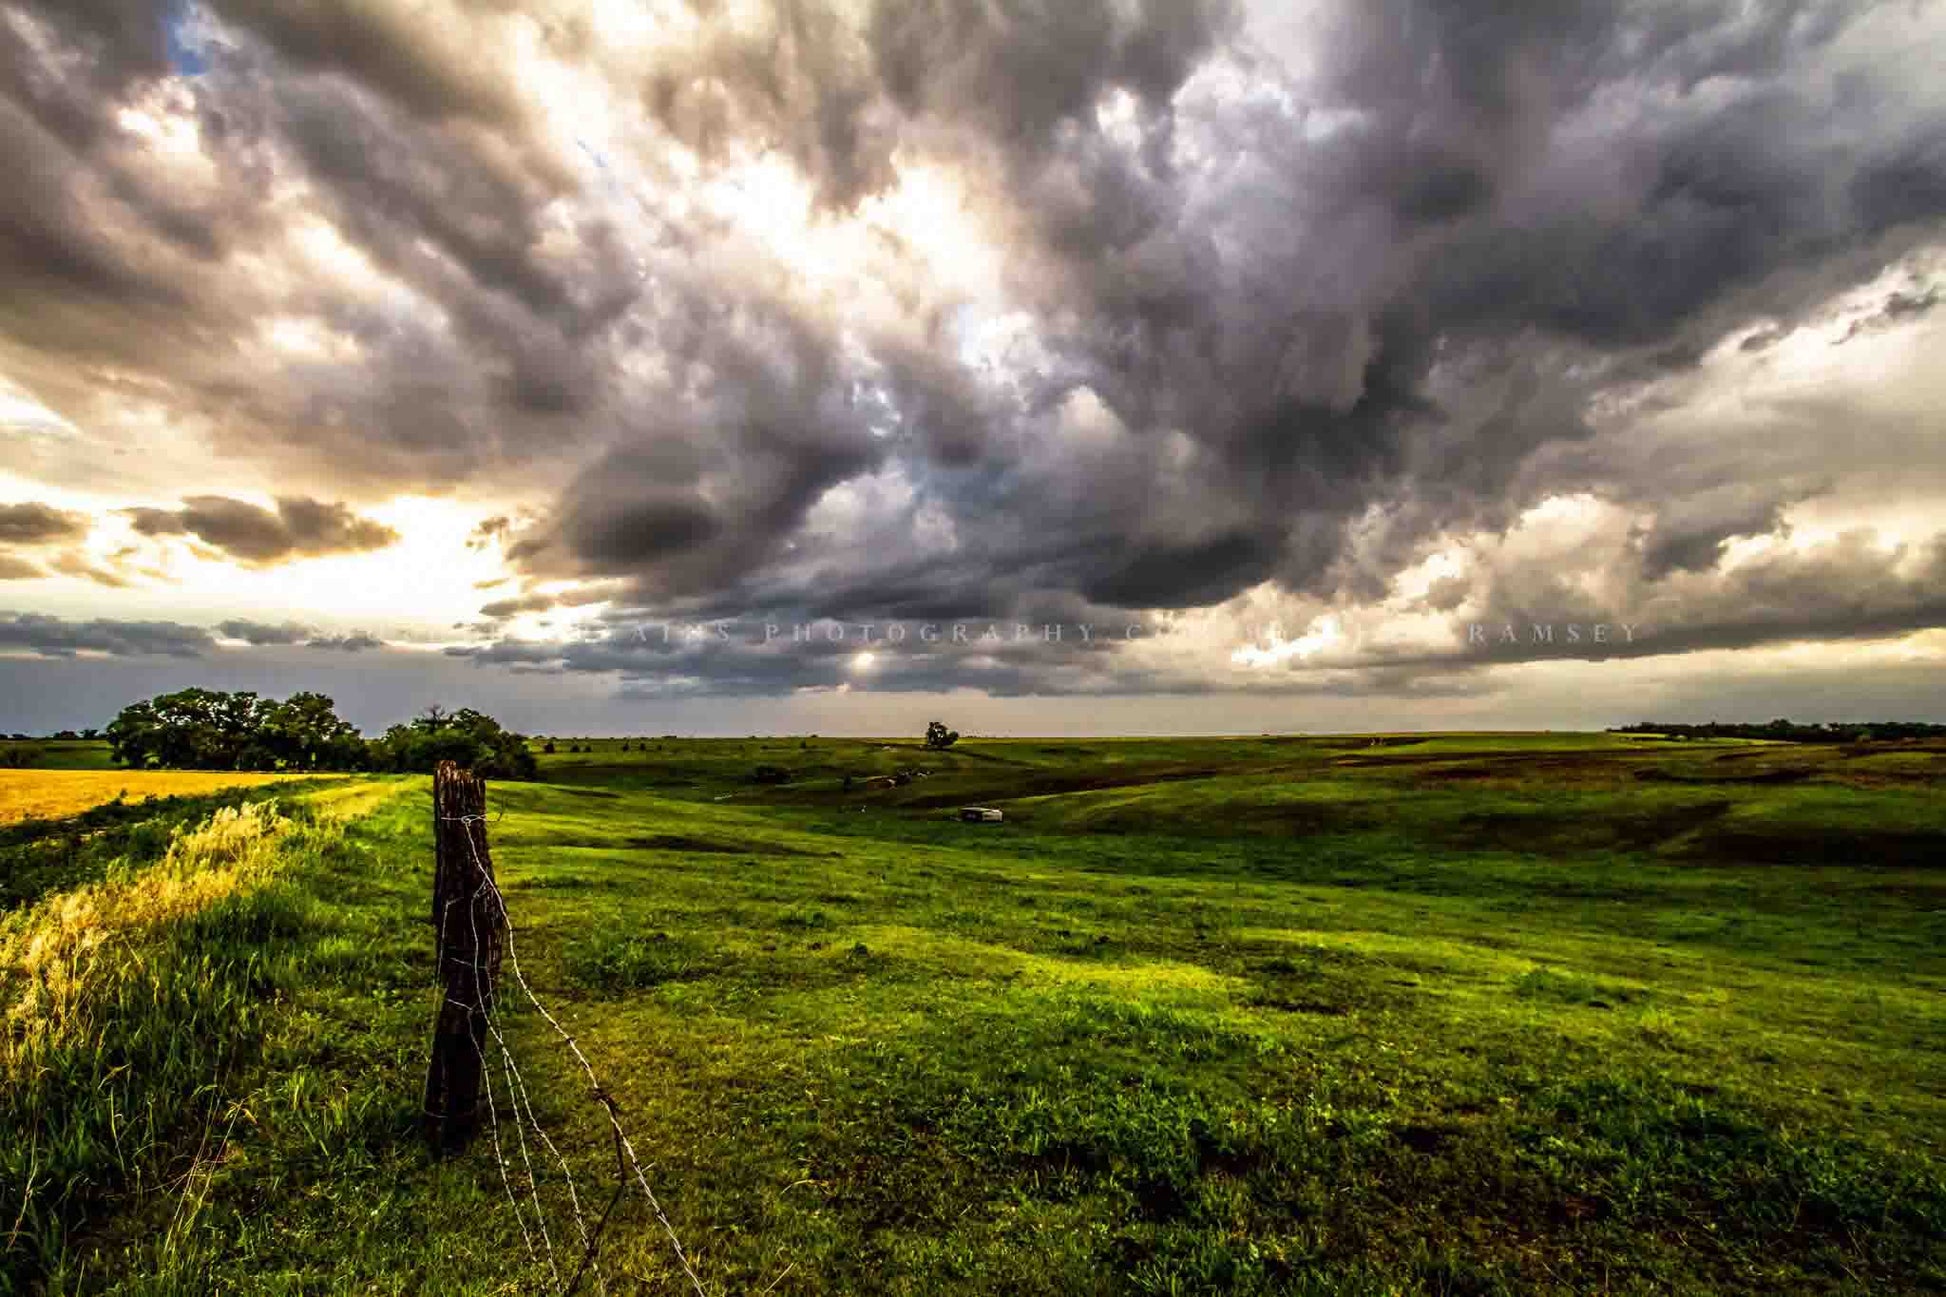 Great plains photography print of golden sunlight filtering through storm clouds and shining on the prairie on a stormy day in Nebraska by Sean Ramsey of Southern Plains Photography.